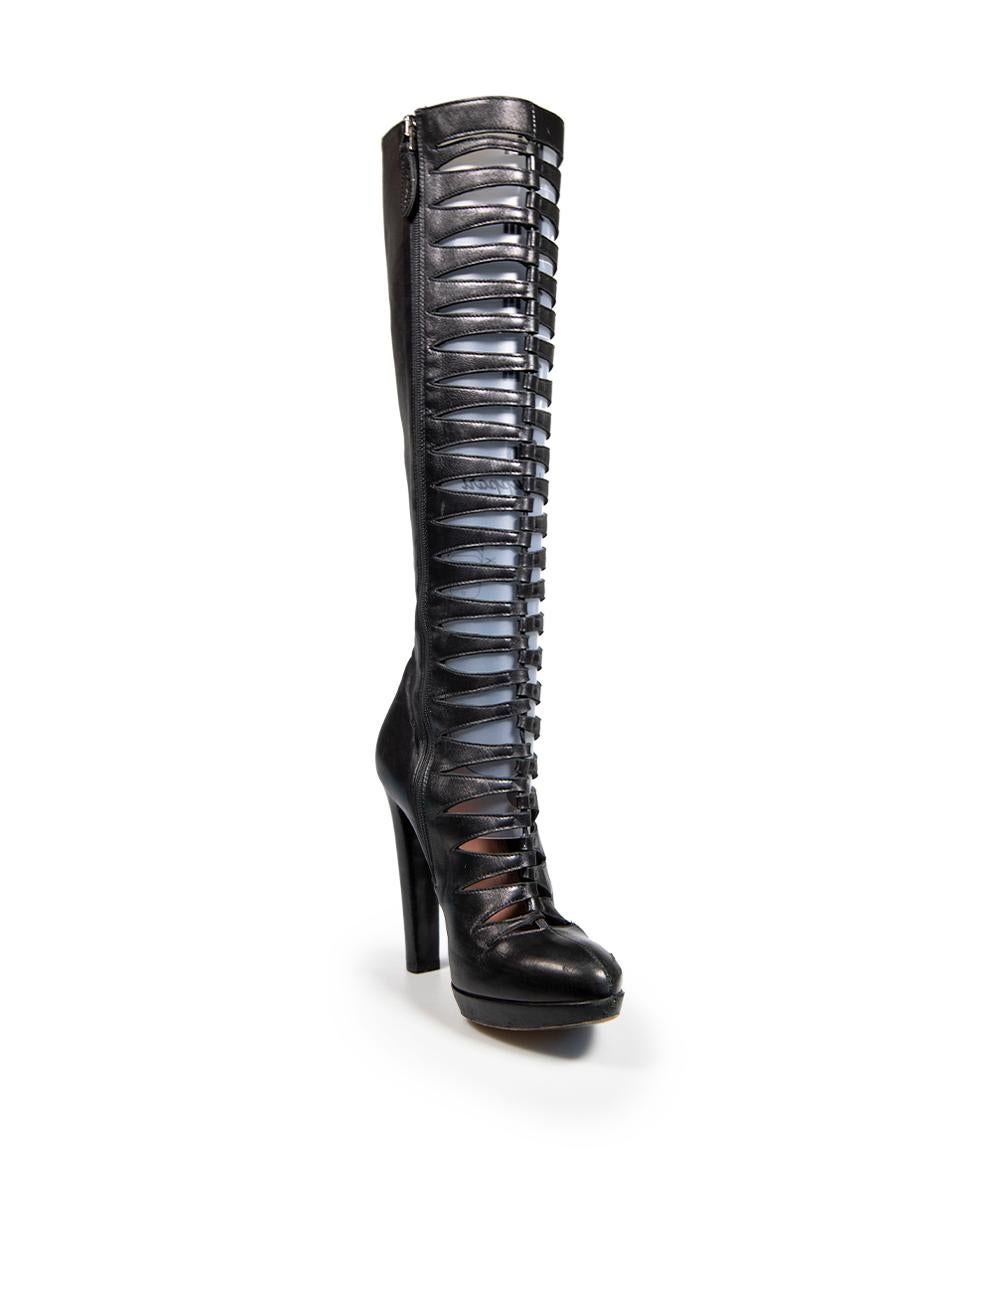 CONDITION is Good. Minor wear to boots is evident. Wear to the heels and soles, with abrasions around the toe edge seam and upper. There are deep abrasions to the toe tip on this used Alaïa designer resale item.
 
 
 
 Details
 
 
 Black
 
 Leather
